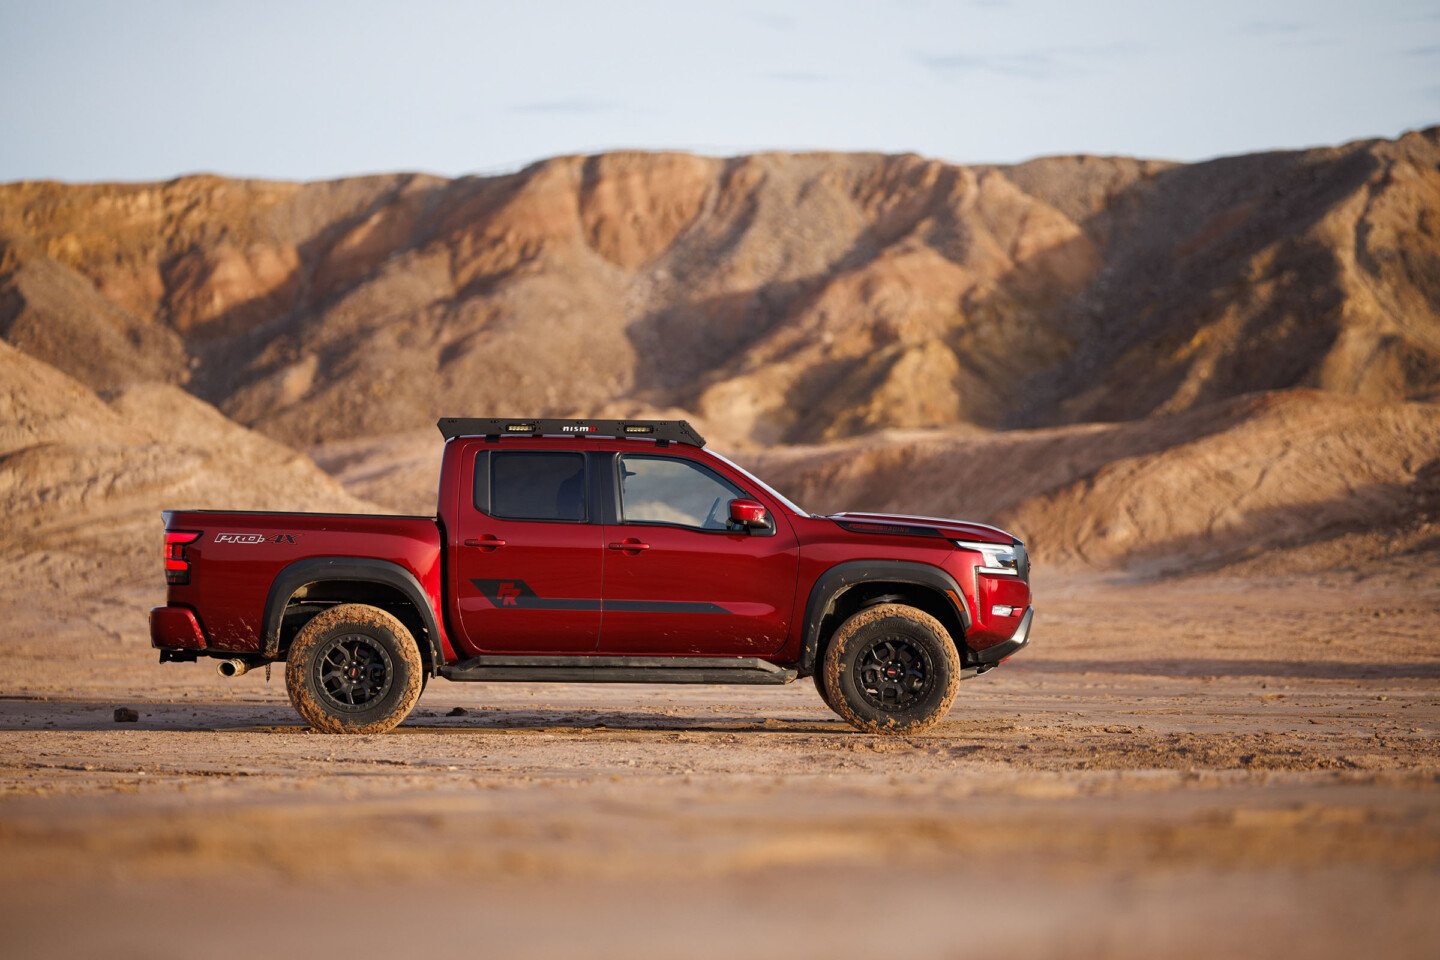 Nissan Frontier Forsberg Edition Is Based On A Desert Racing Dream